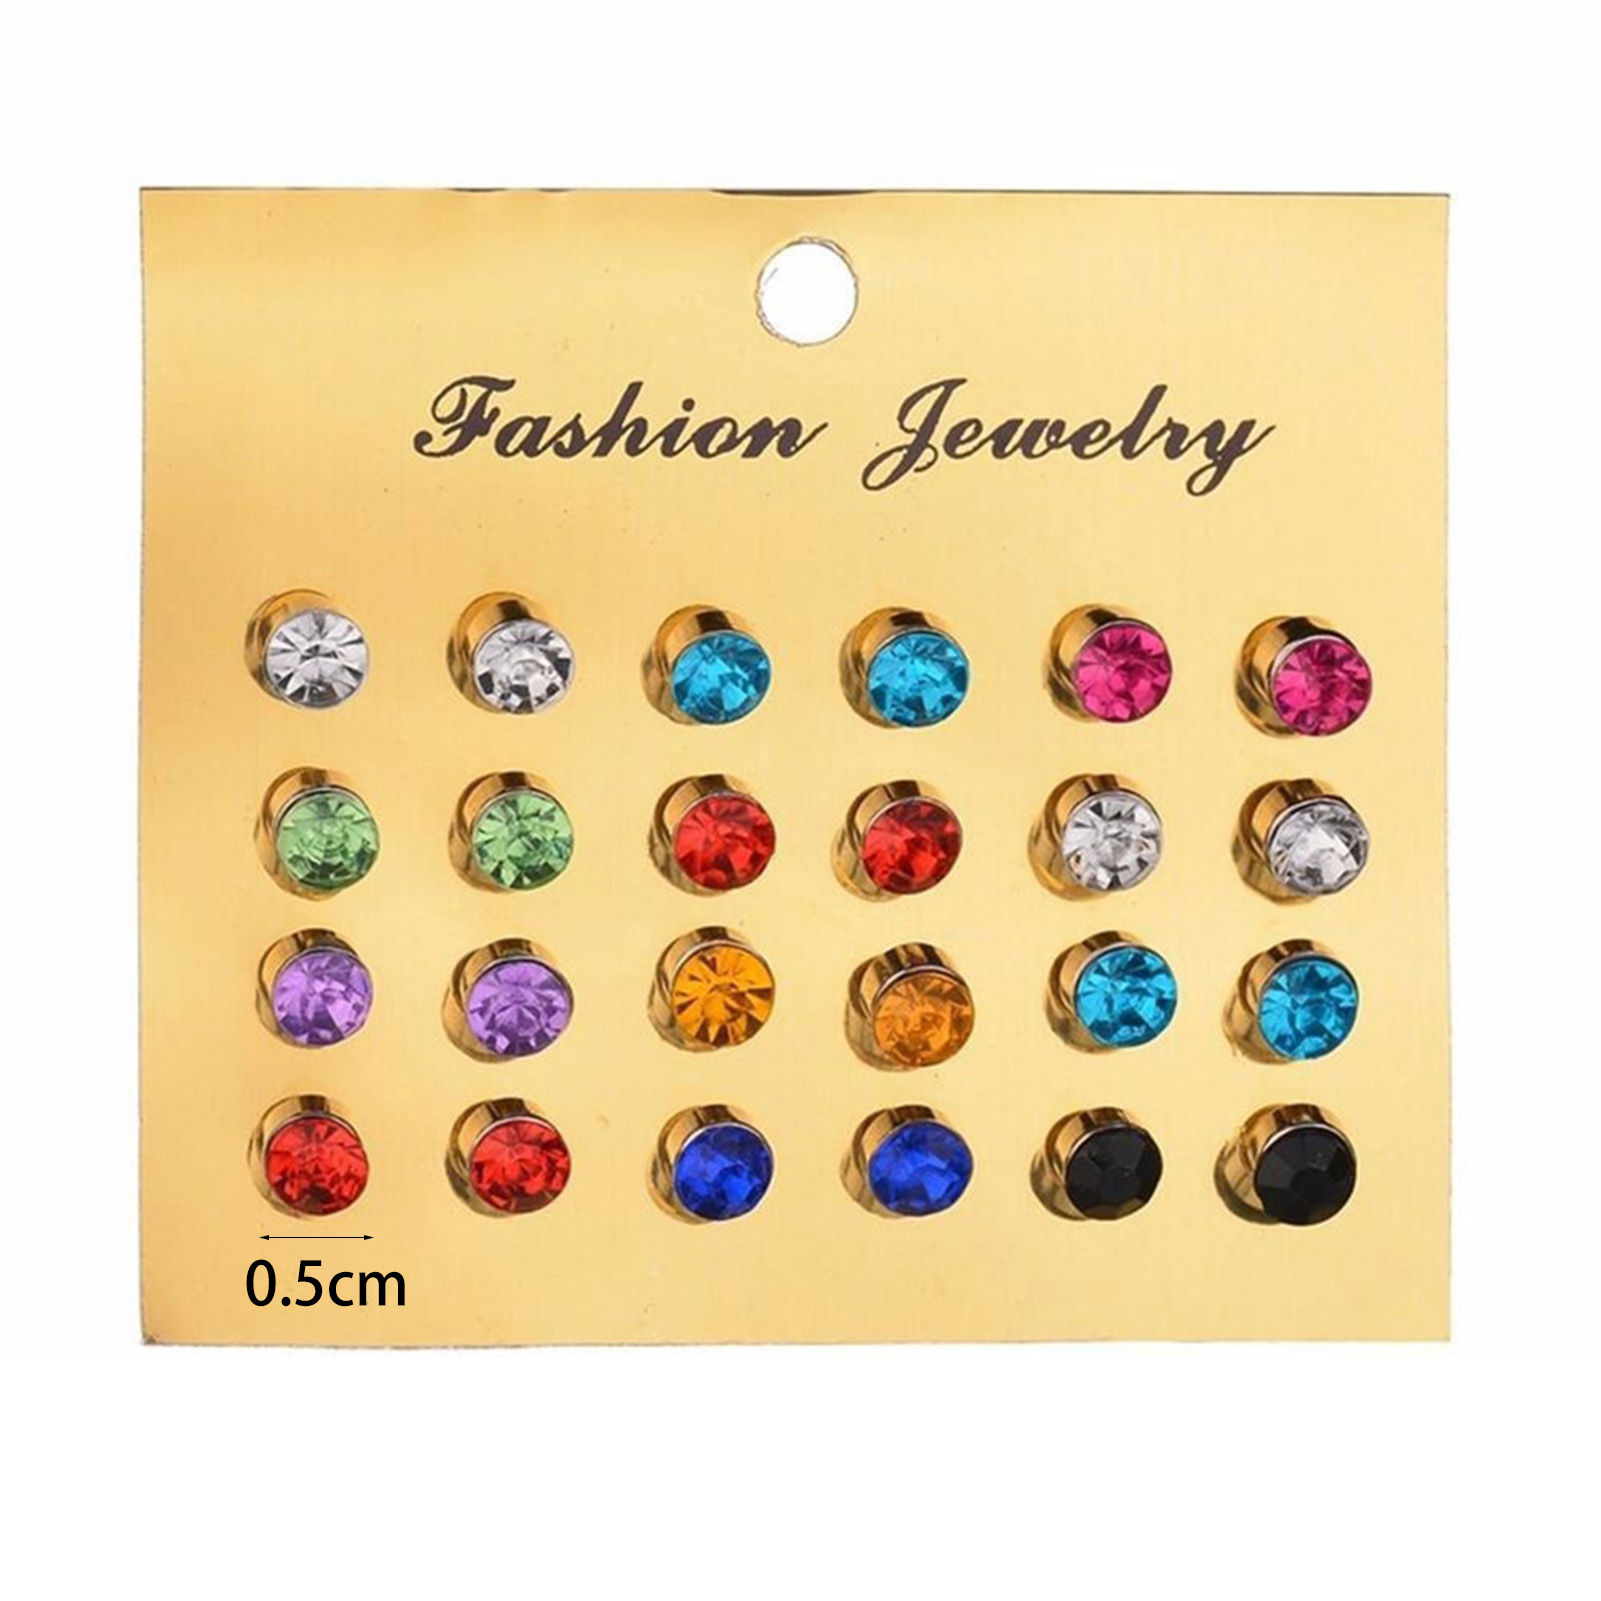 Naierhg 12Pcs/Set Earrings Nickel-free with Rhinestone Alloy Women Earring Jewelry for Birthday - image 5 of 7